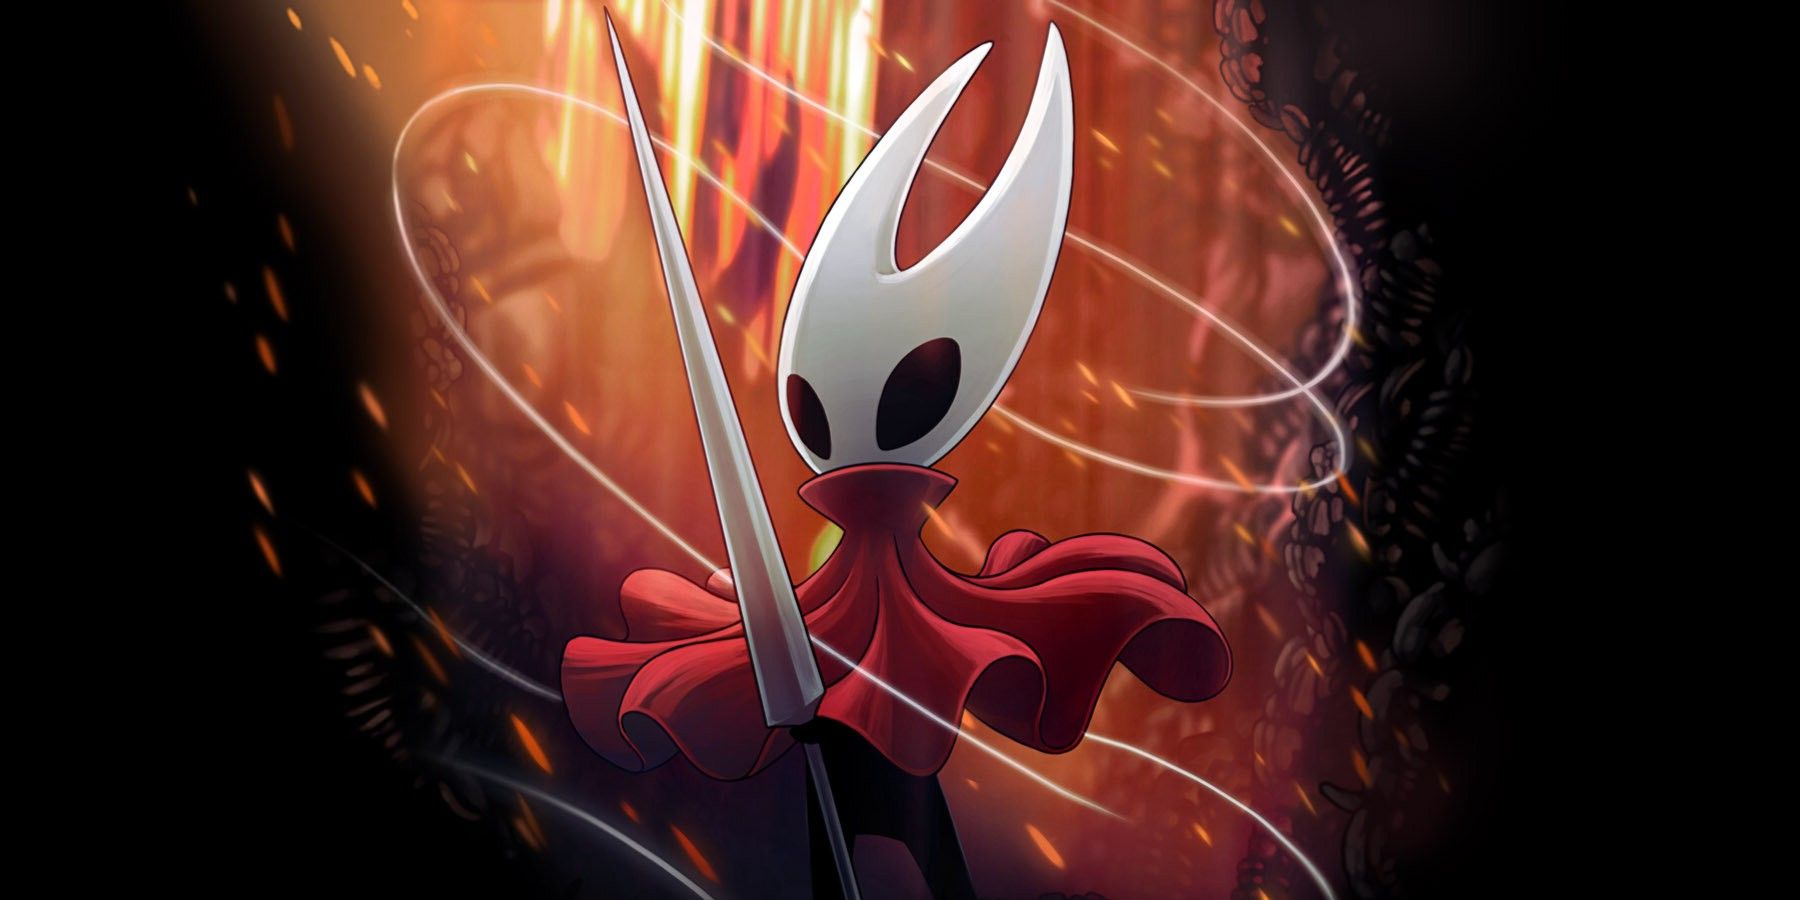 Hollow Knight Silksong is also coming to PlayStation